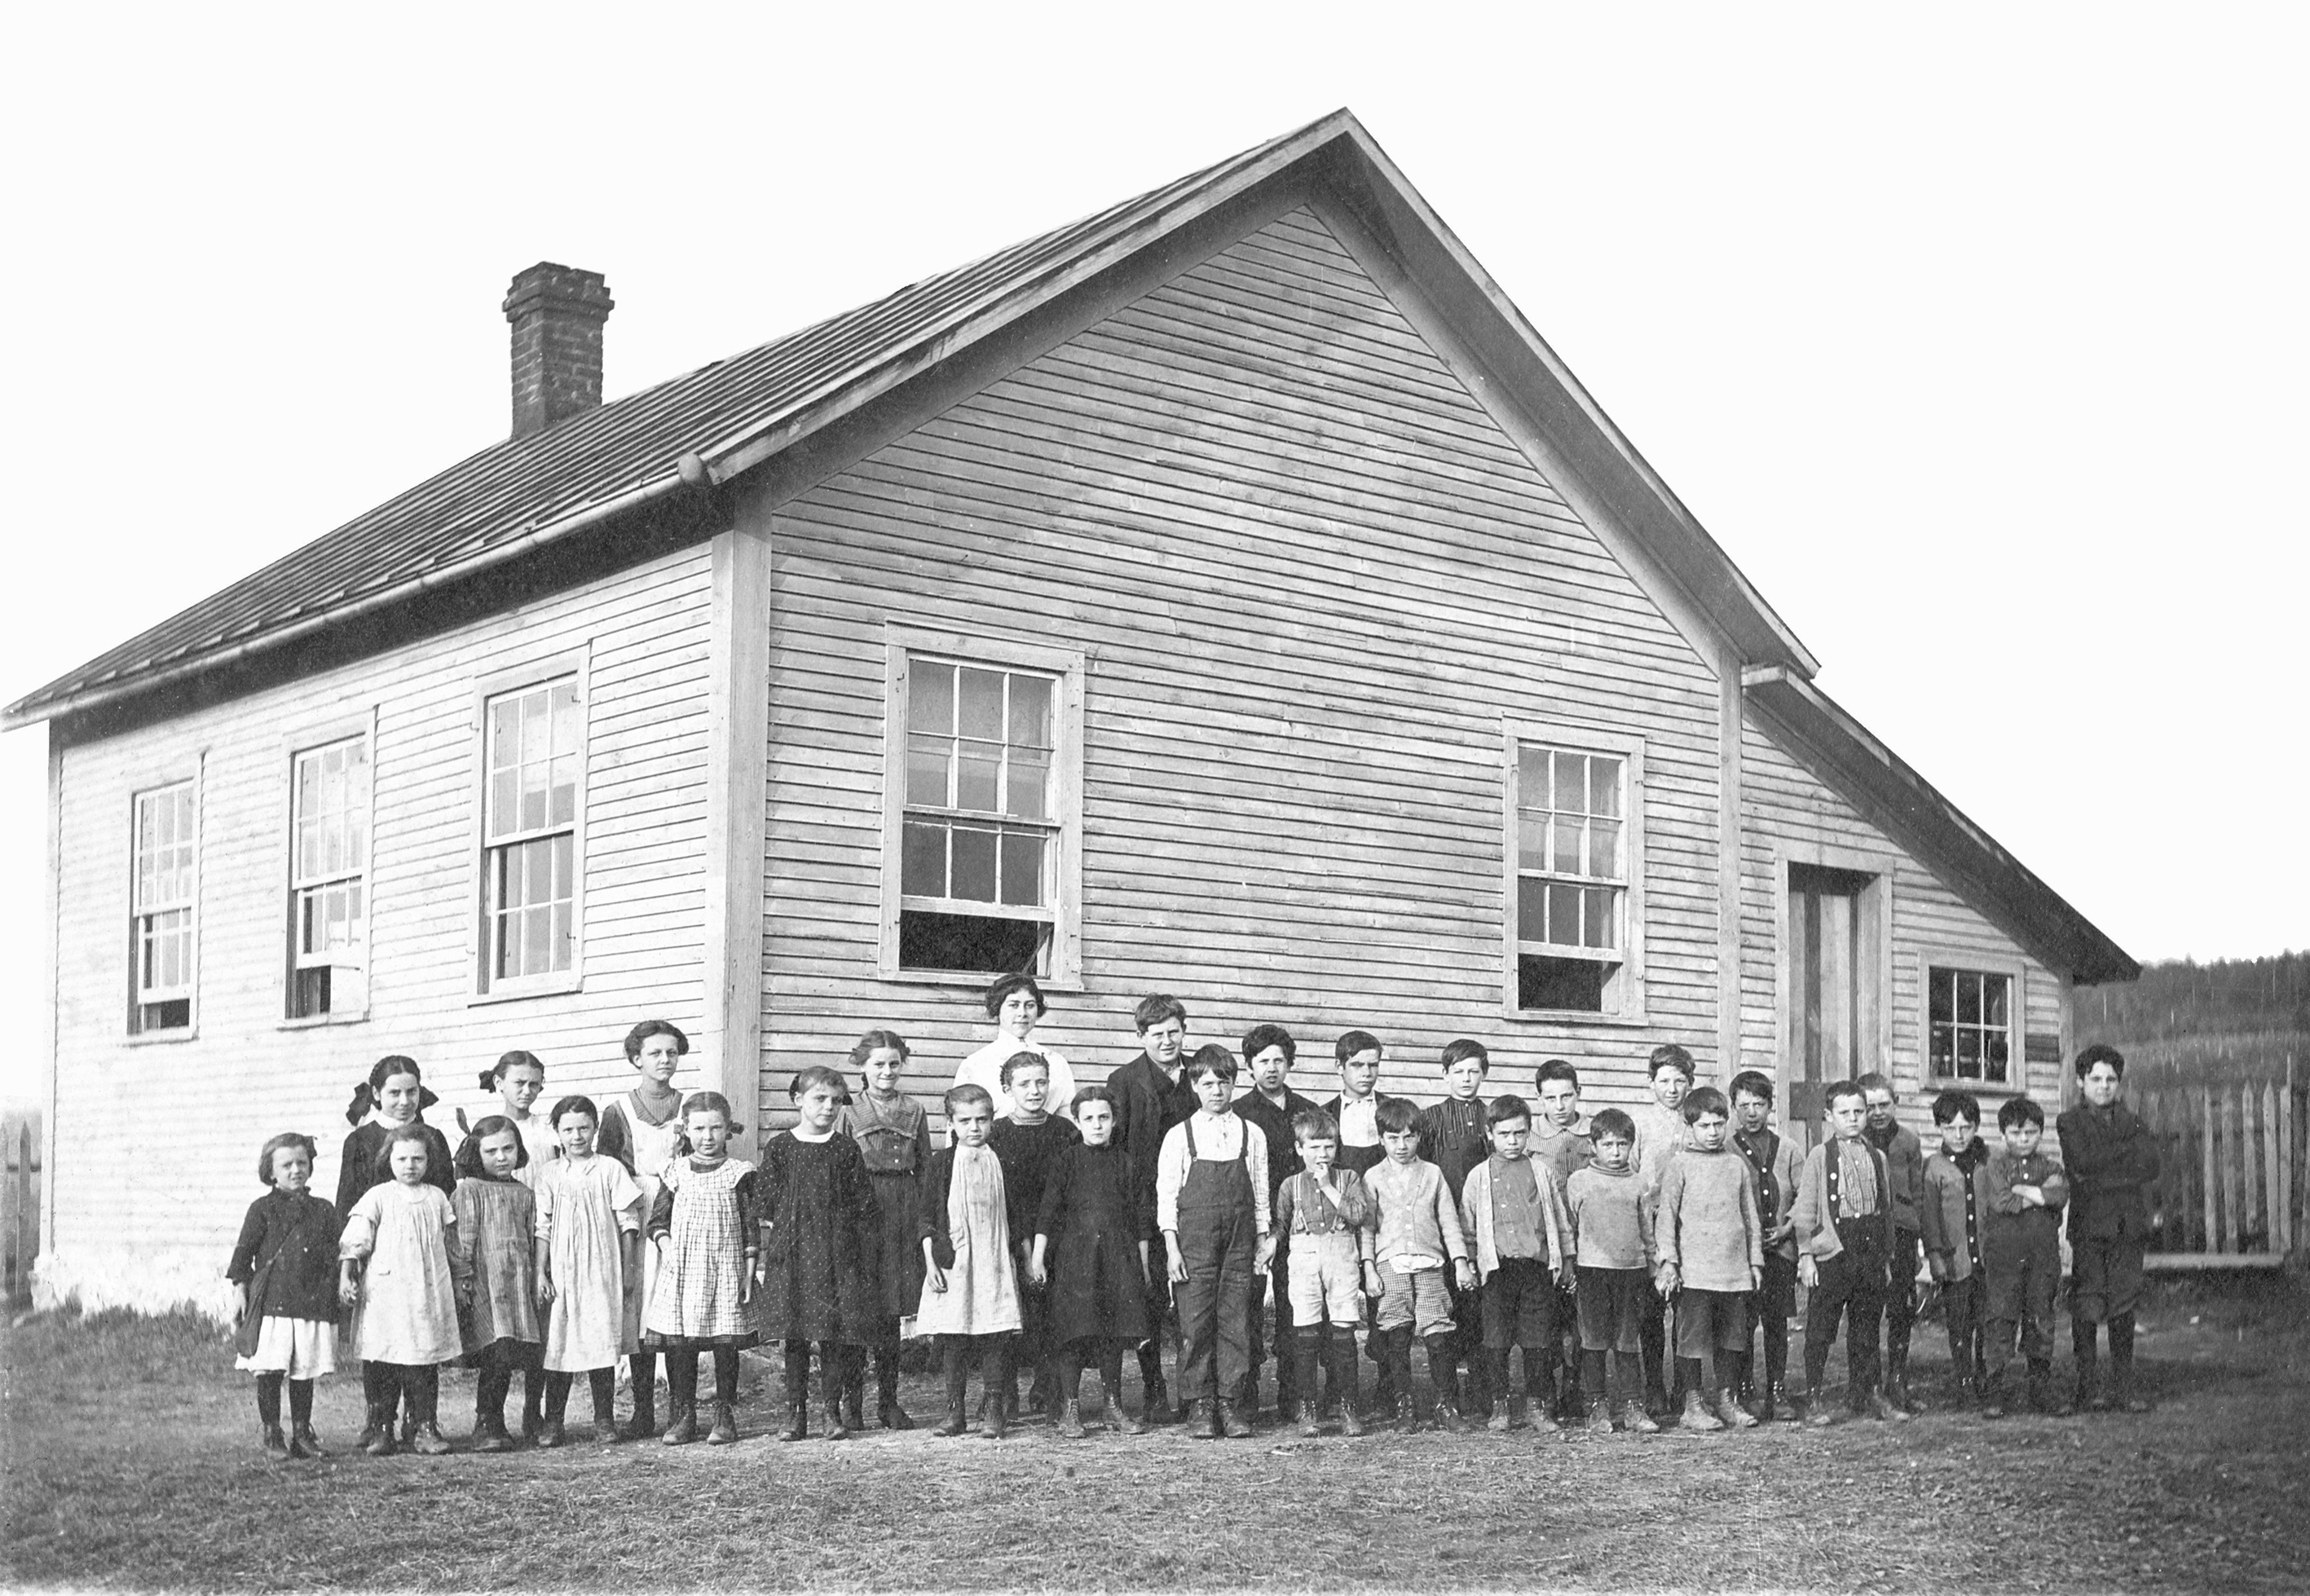 Twenty-nine school children of all ages pose with their teacher in front of a small white woodenbuilding.